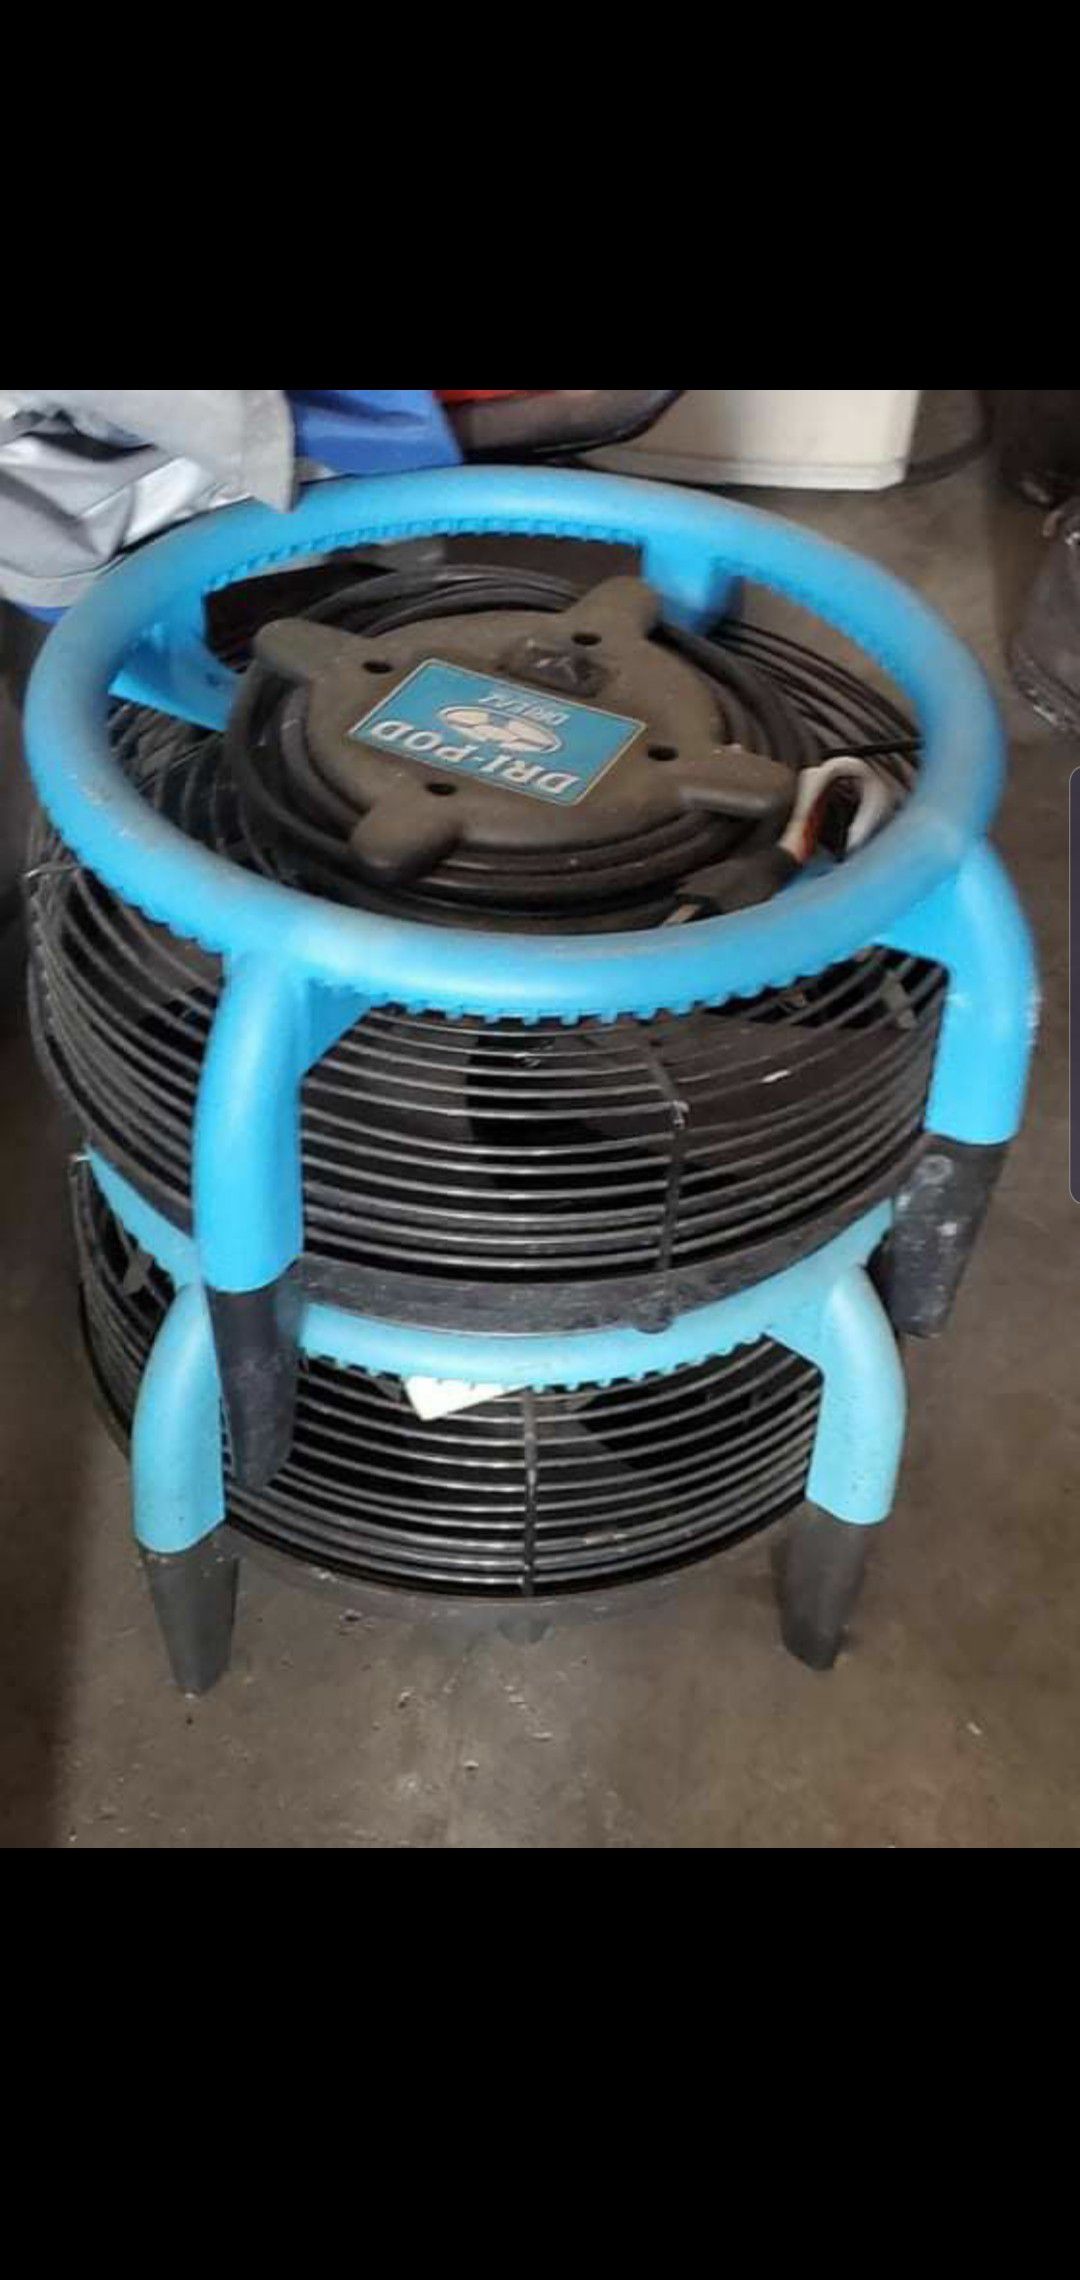 2 carpet fans for the price of 1